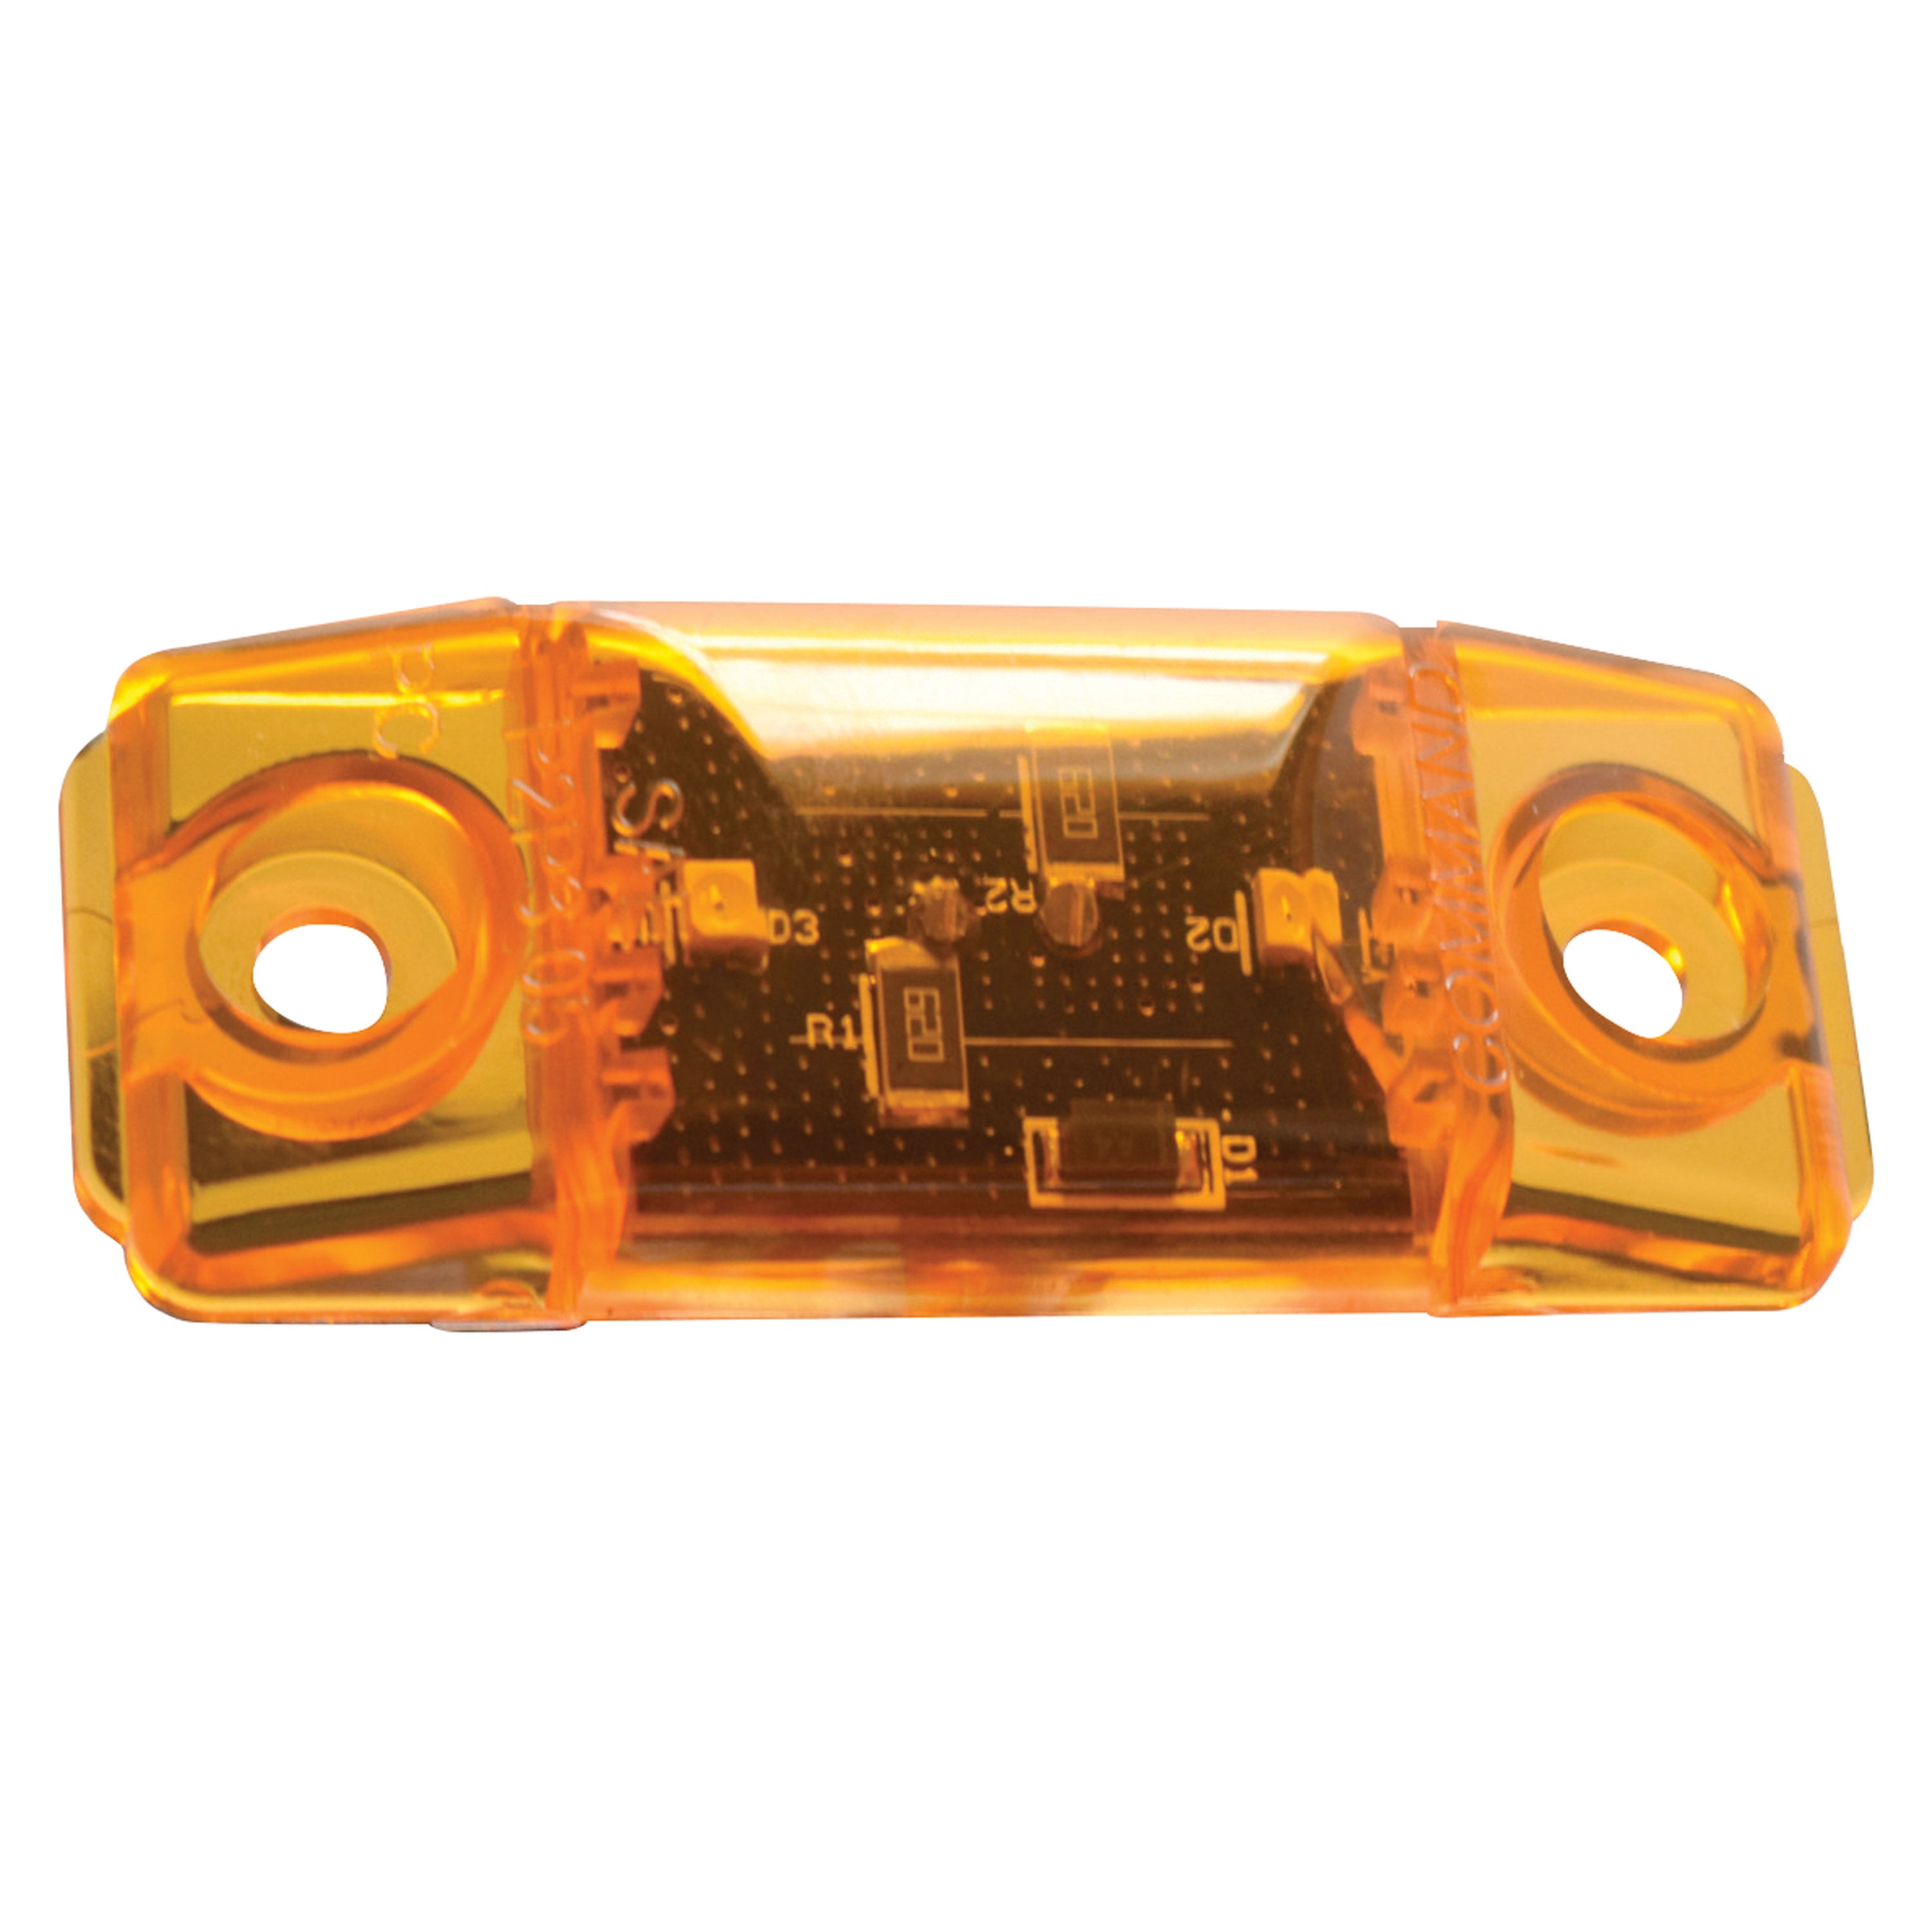 Fasteners Unlimited 003-17A LED Hot-Dog Marker/Clearance Light With Gasket - Amber, 2.8 in. L x 1.1 in. H CMD-003-17A